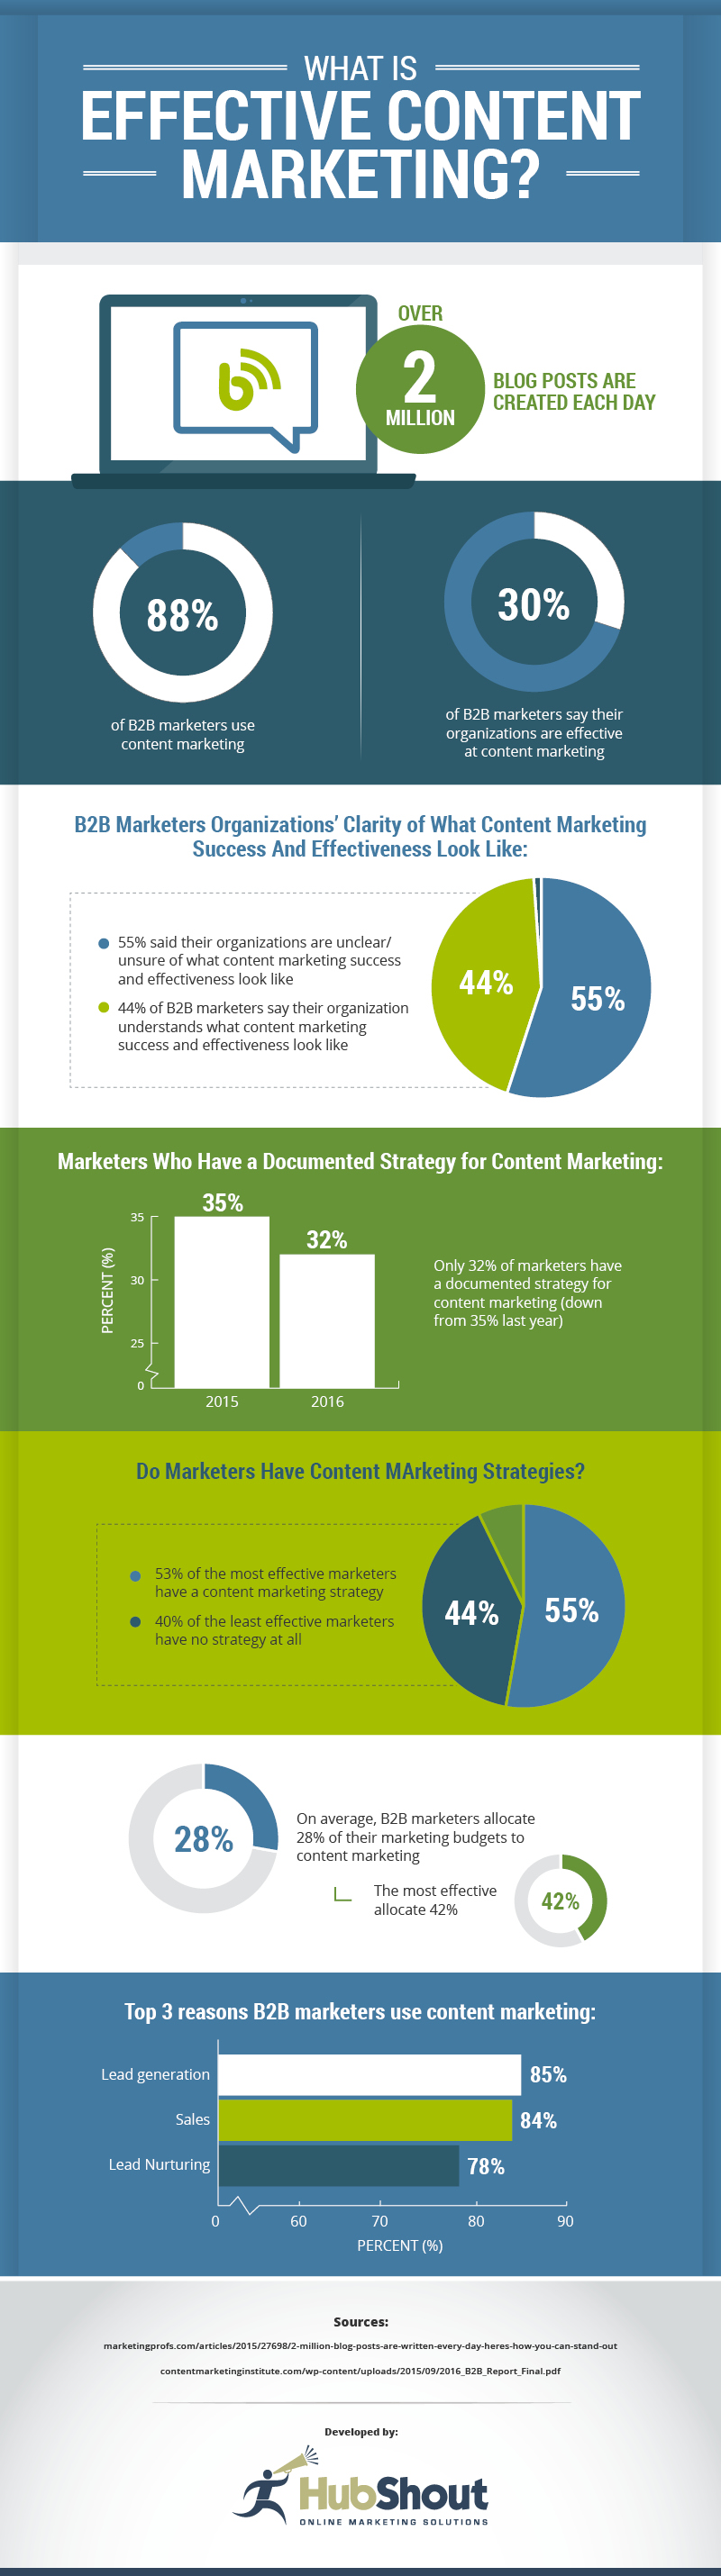 Content Marketing strategy 2019